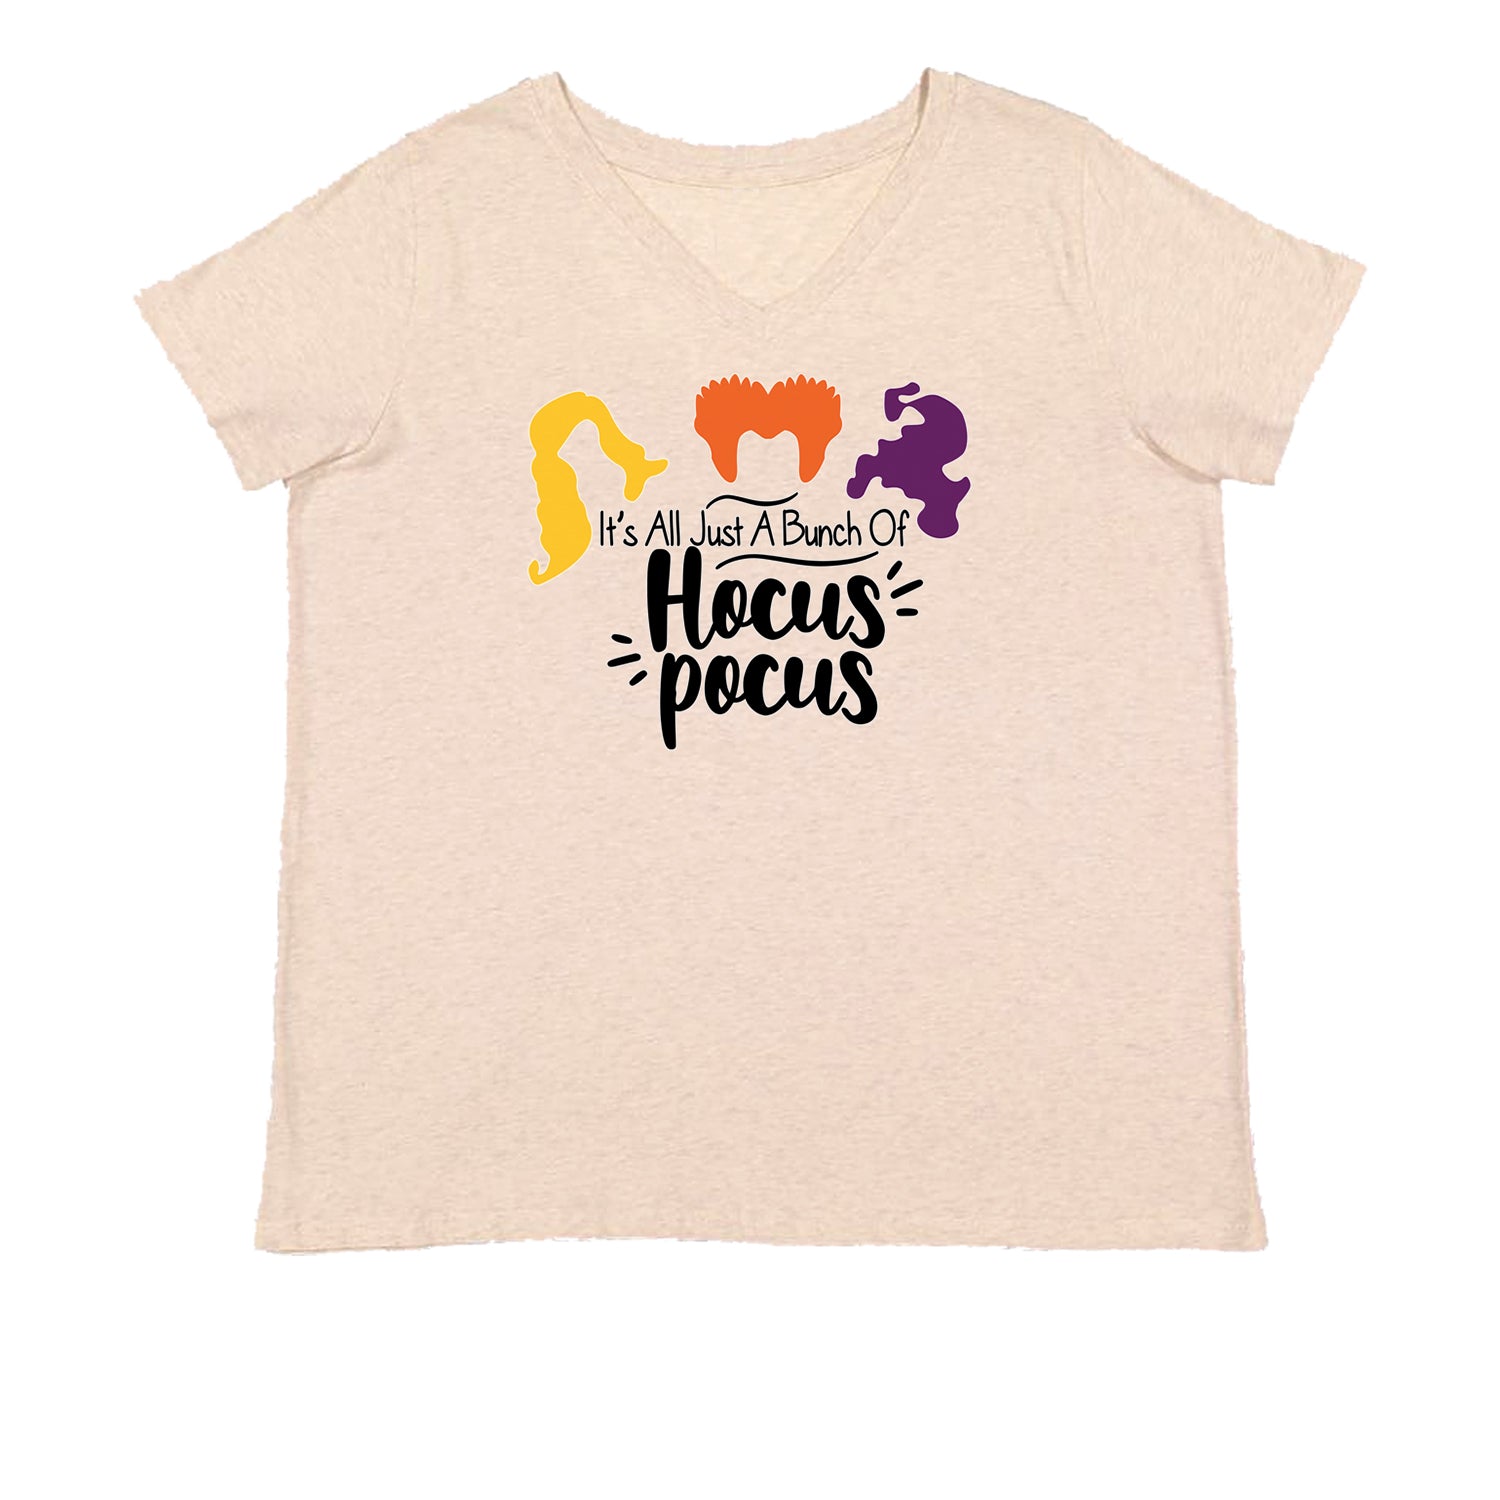 It's Just A Bunch Of Hocus Pocus Womens Plus Size V-Neck T-shirt descendants, enchanted, eve, hallows, hocus, or, pocus, sanderson, sisters, treat, trick, witches by Expression Tees